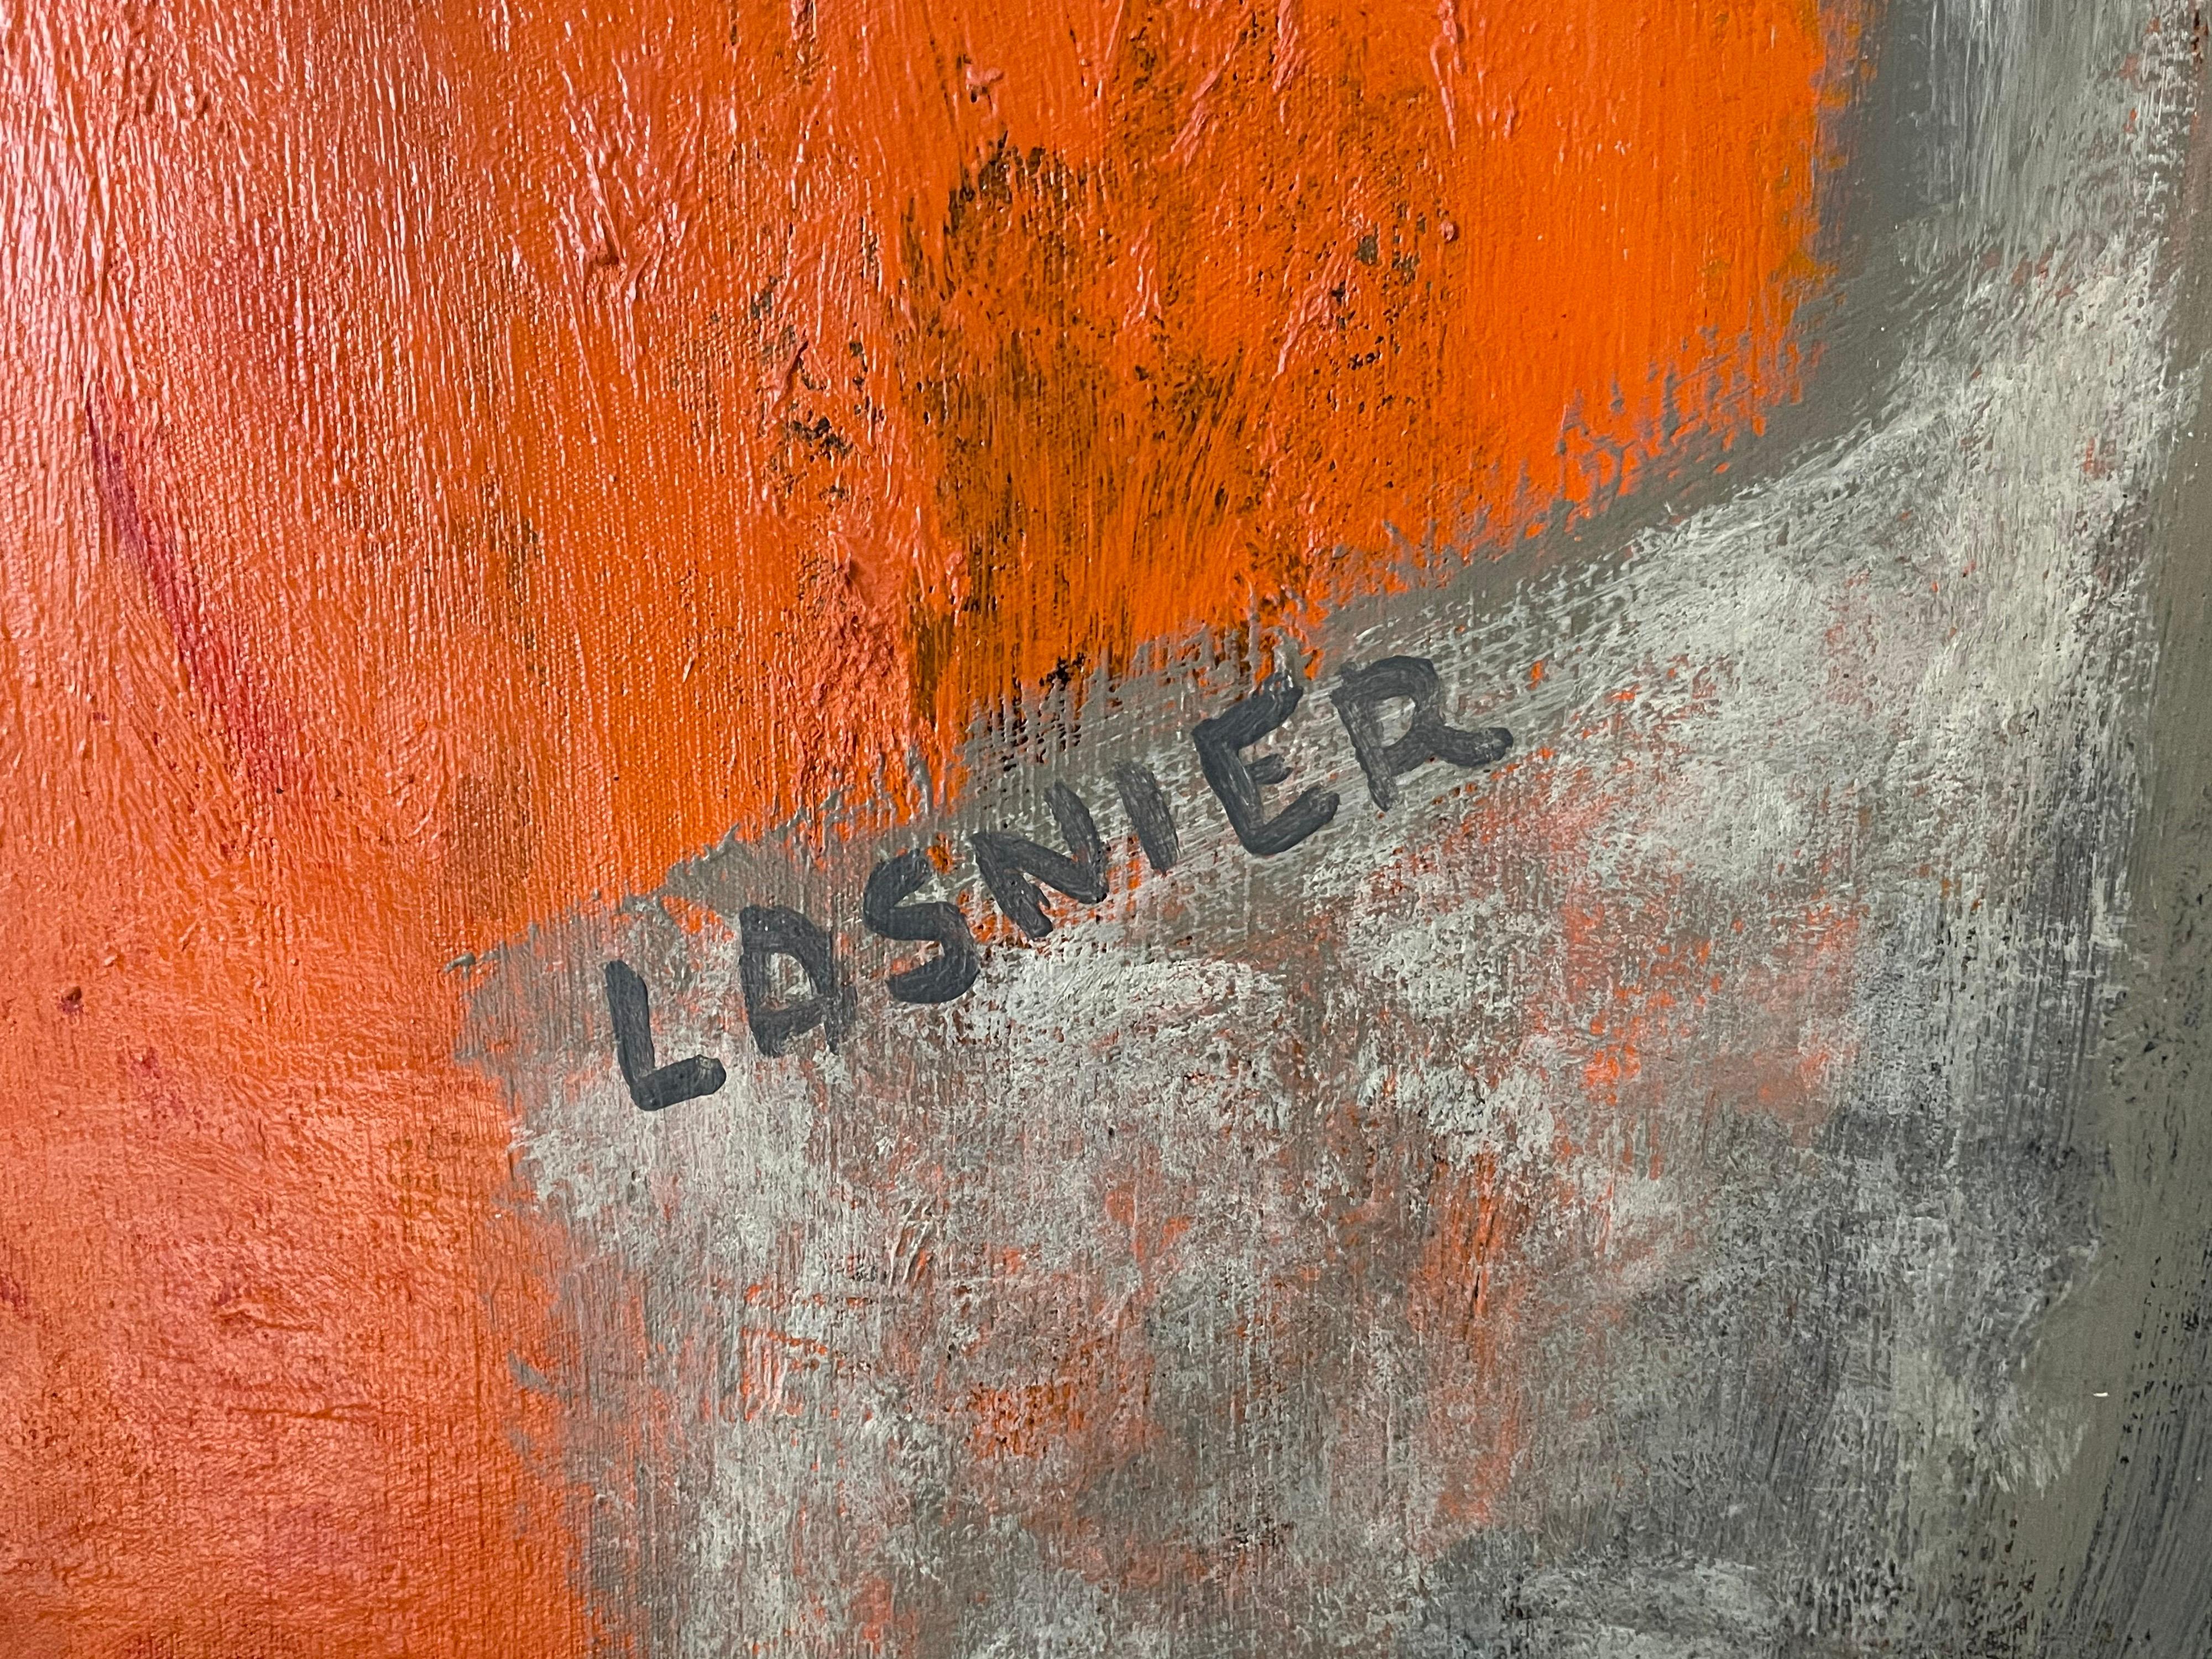 Abstract Expressionism
by Jean Lasnier (French 1922-2006)
signed lower corner, inscribed verso
oil painting on canvas, studio framed
overall size: 52 x 64 inches
provenance: the artists estate, France
condition: very good, frame has minor old scuffs